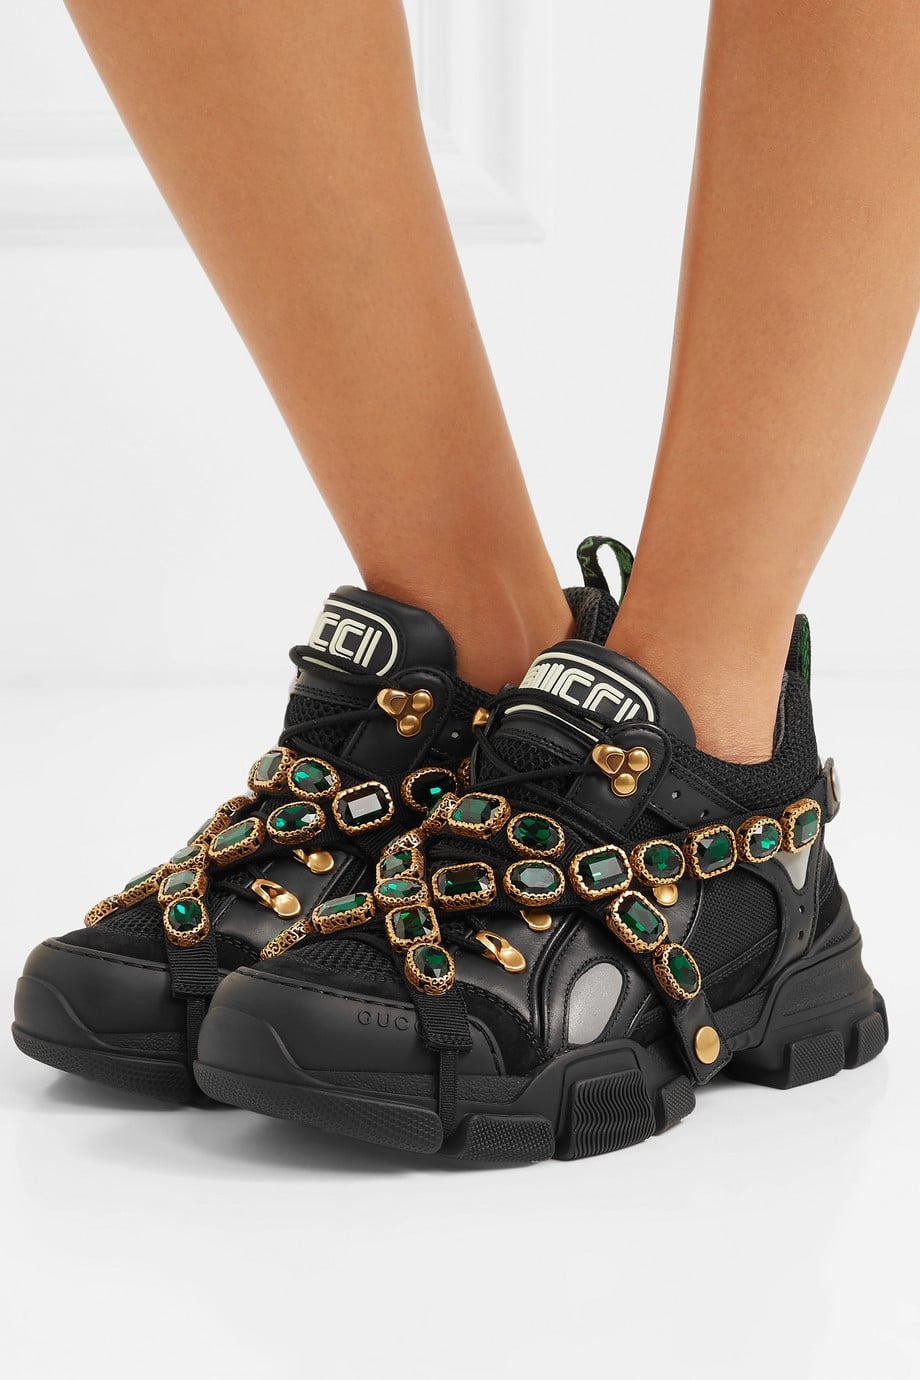 Gucci Flashtrek Embellished Sneakers | 33 Billie Eilish Fashion Gifts to  Help Fans Bring Out Their Inner Bad Girl | POPSUGAR Fashion Photo 14